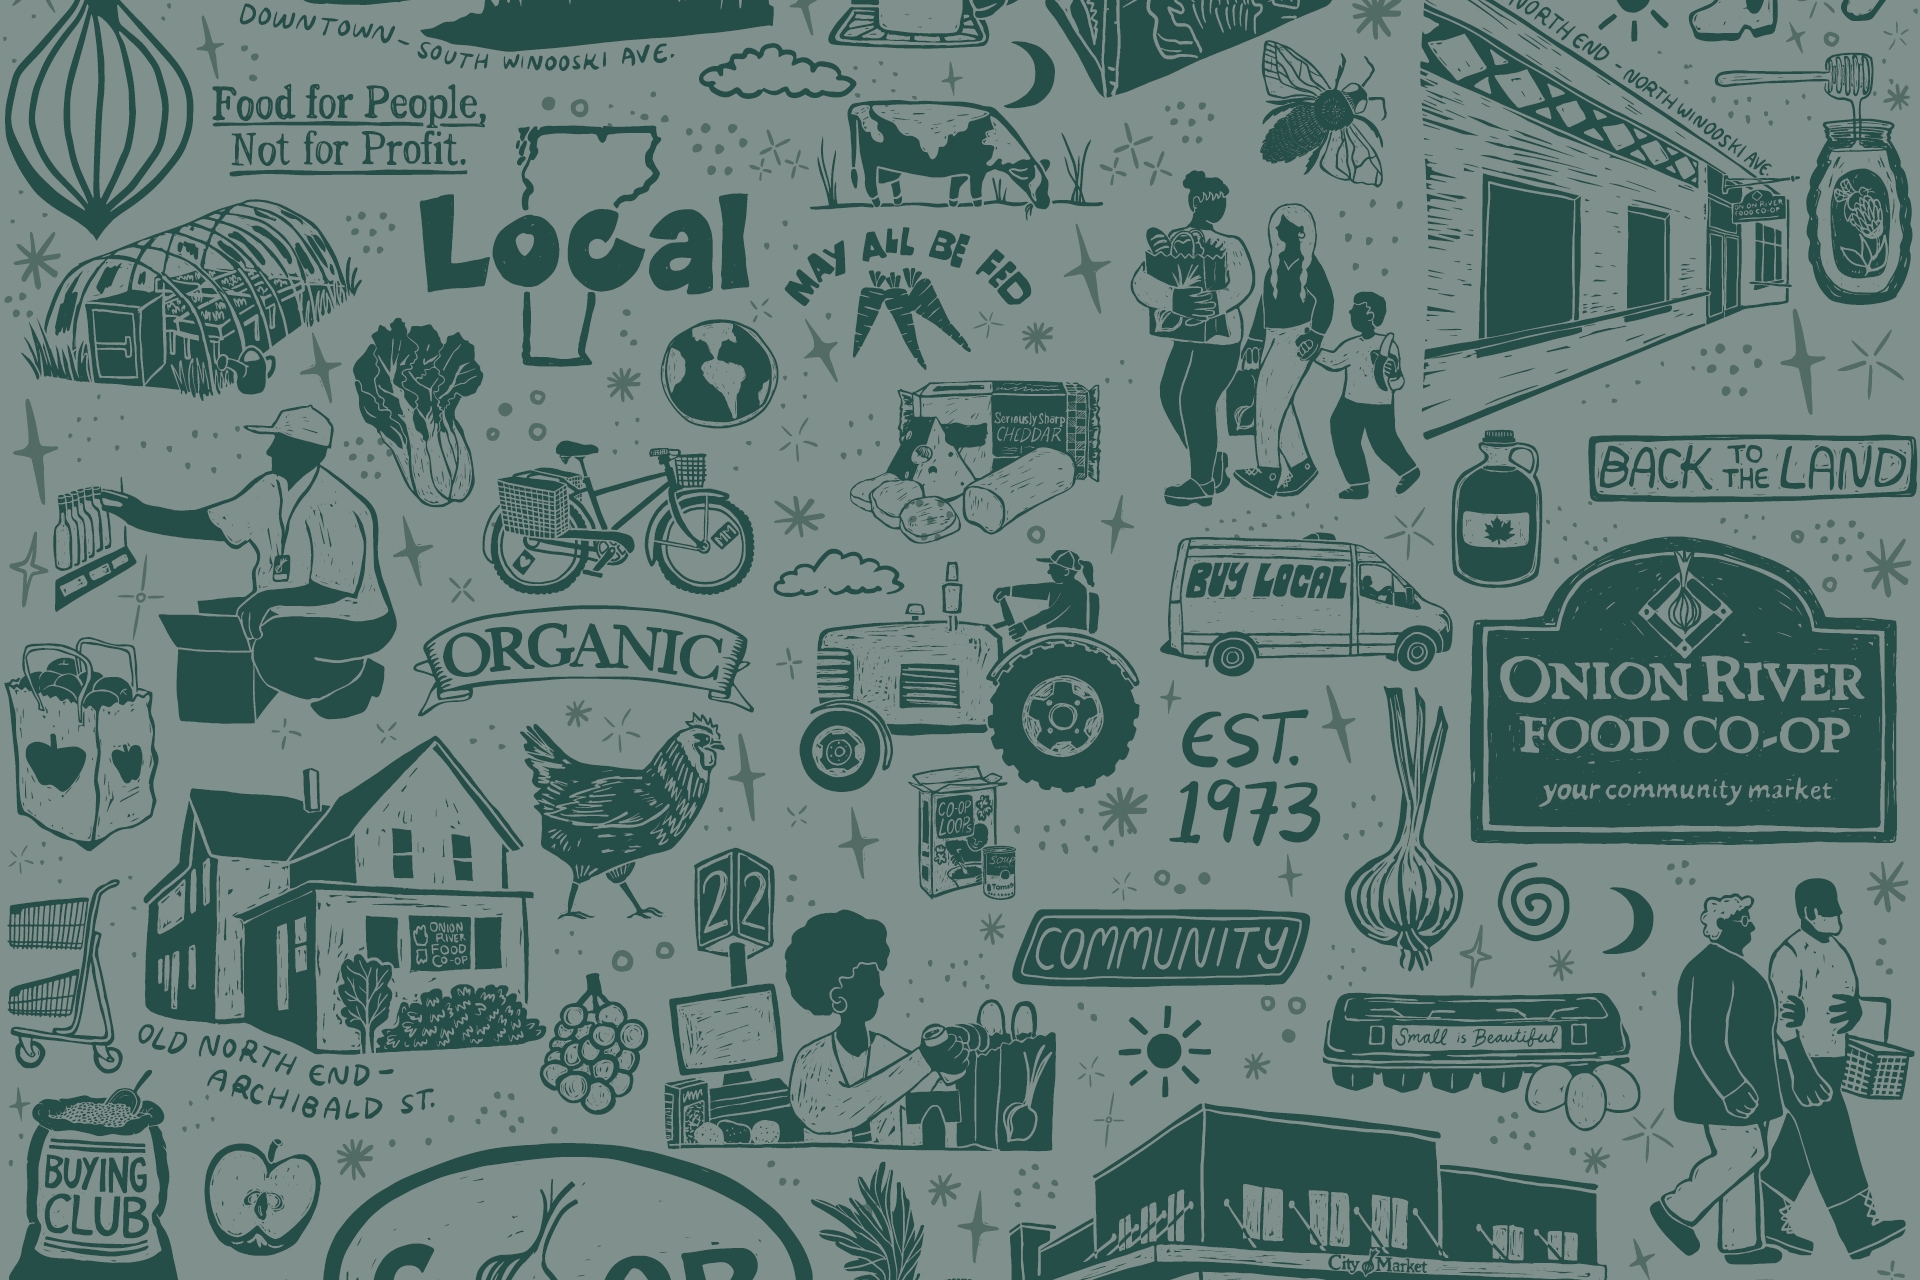 A light green background with dark green illustrations of the Co-op's history and community.